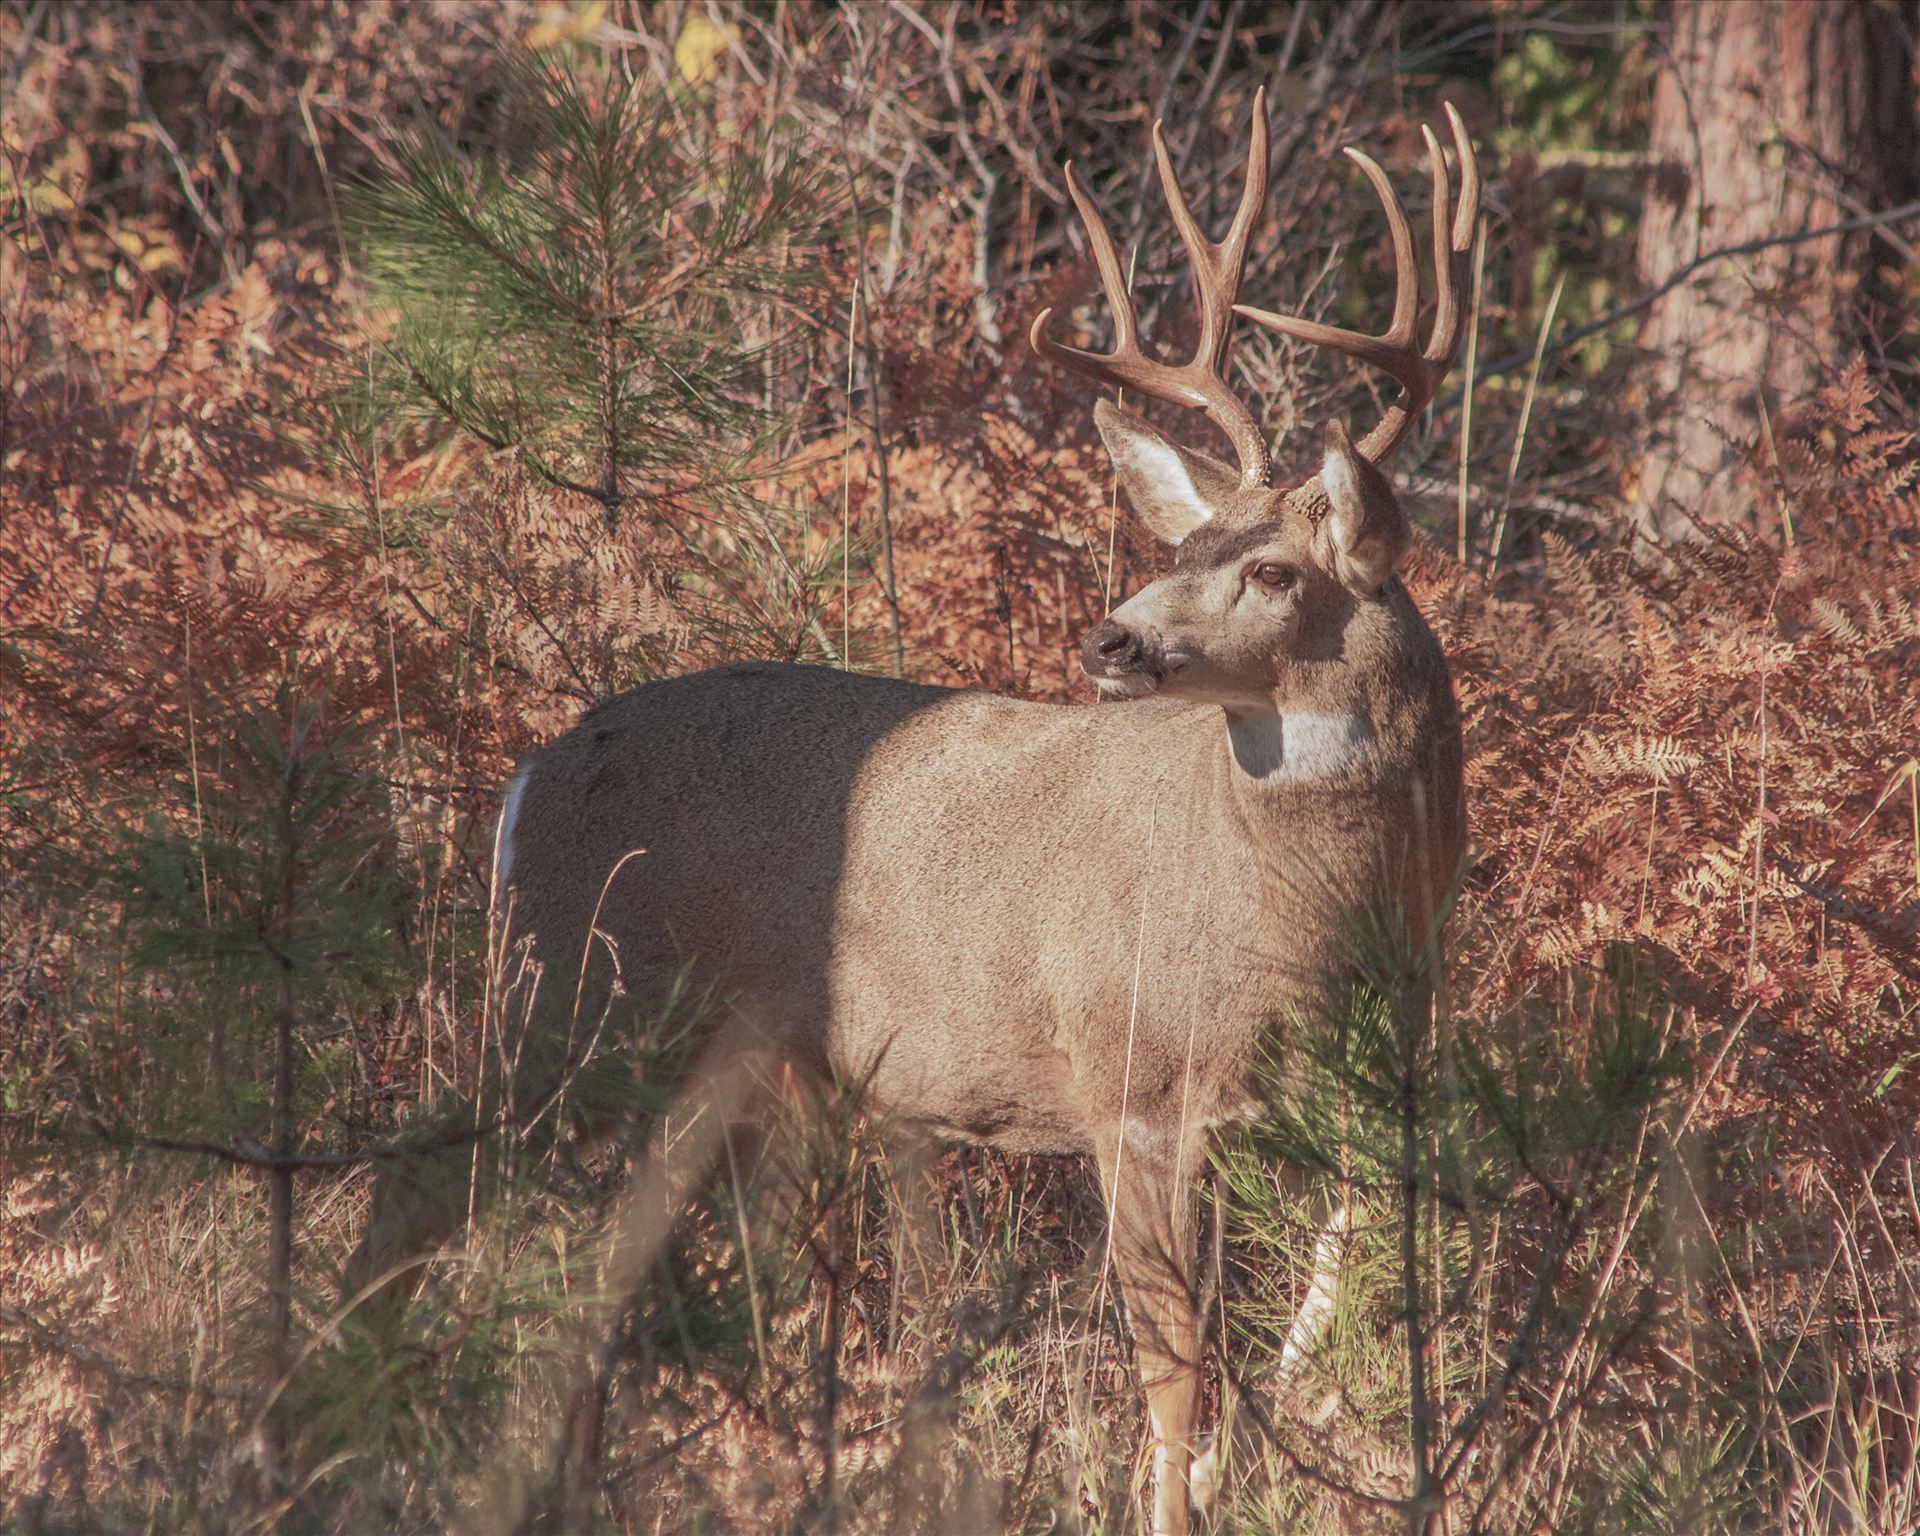 On Alert - This big 4x4 buck has his attention elsewhere as I snuck up on him to get this shot. by Bear Conceptions Photography